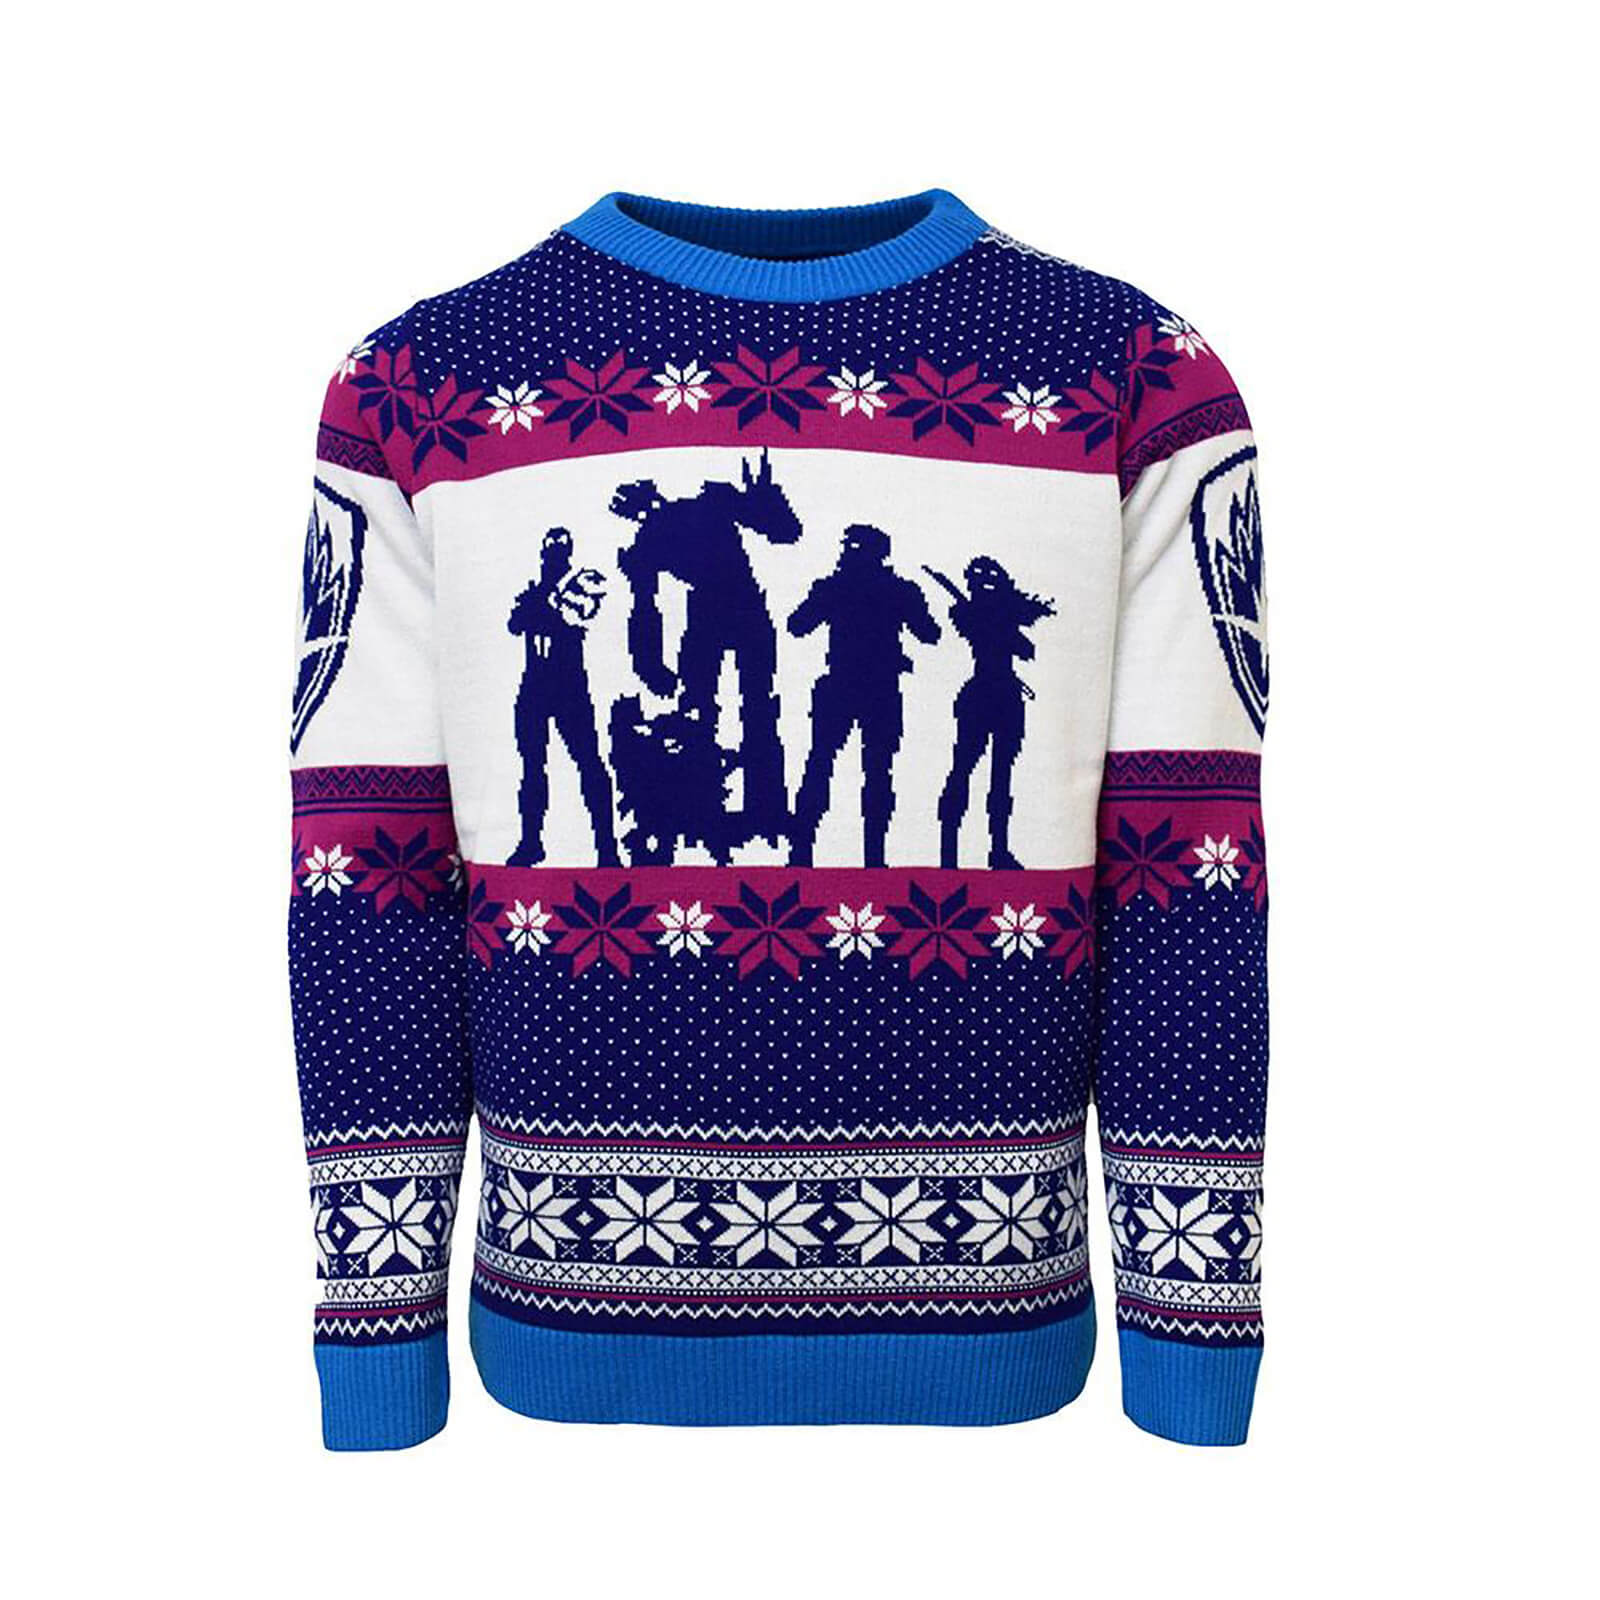 Guardians of the Galaxy Christmas Jumper - Blue - XS